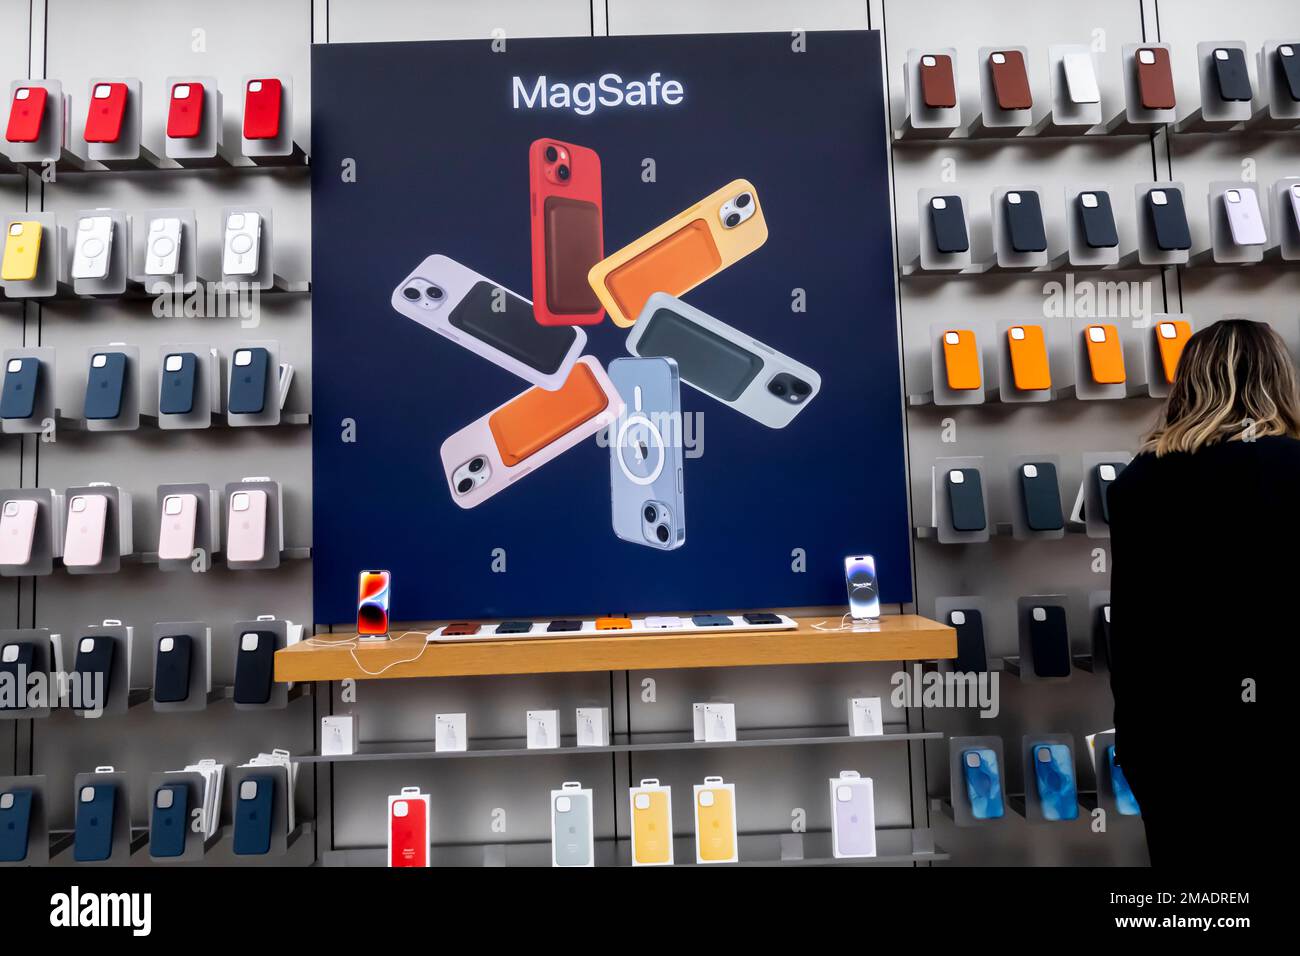 Magsafe Charger poster and stand in Apple Zorlu Center, Electronics store in Istanbul Turkey Stock Photo